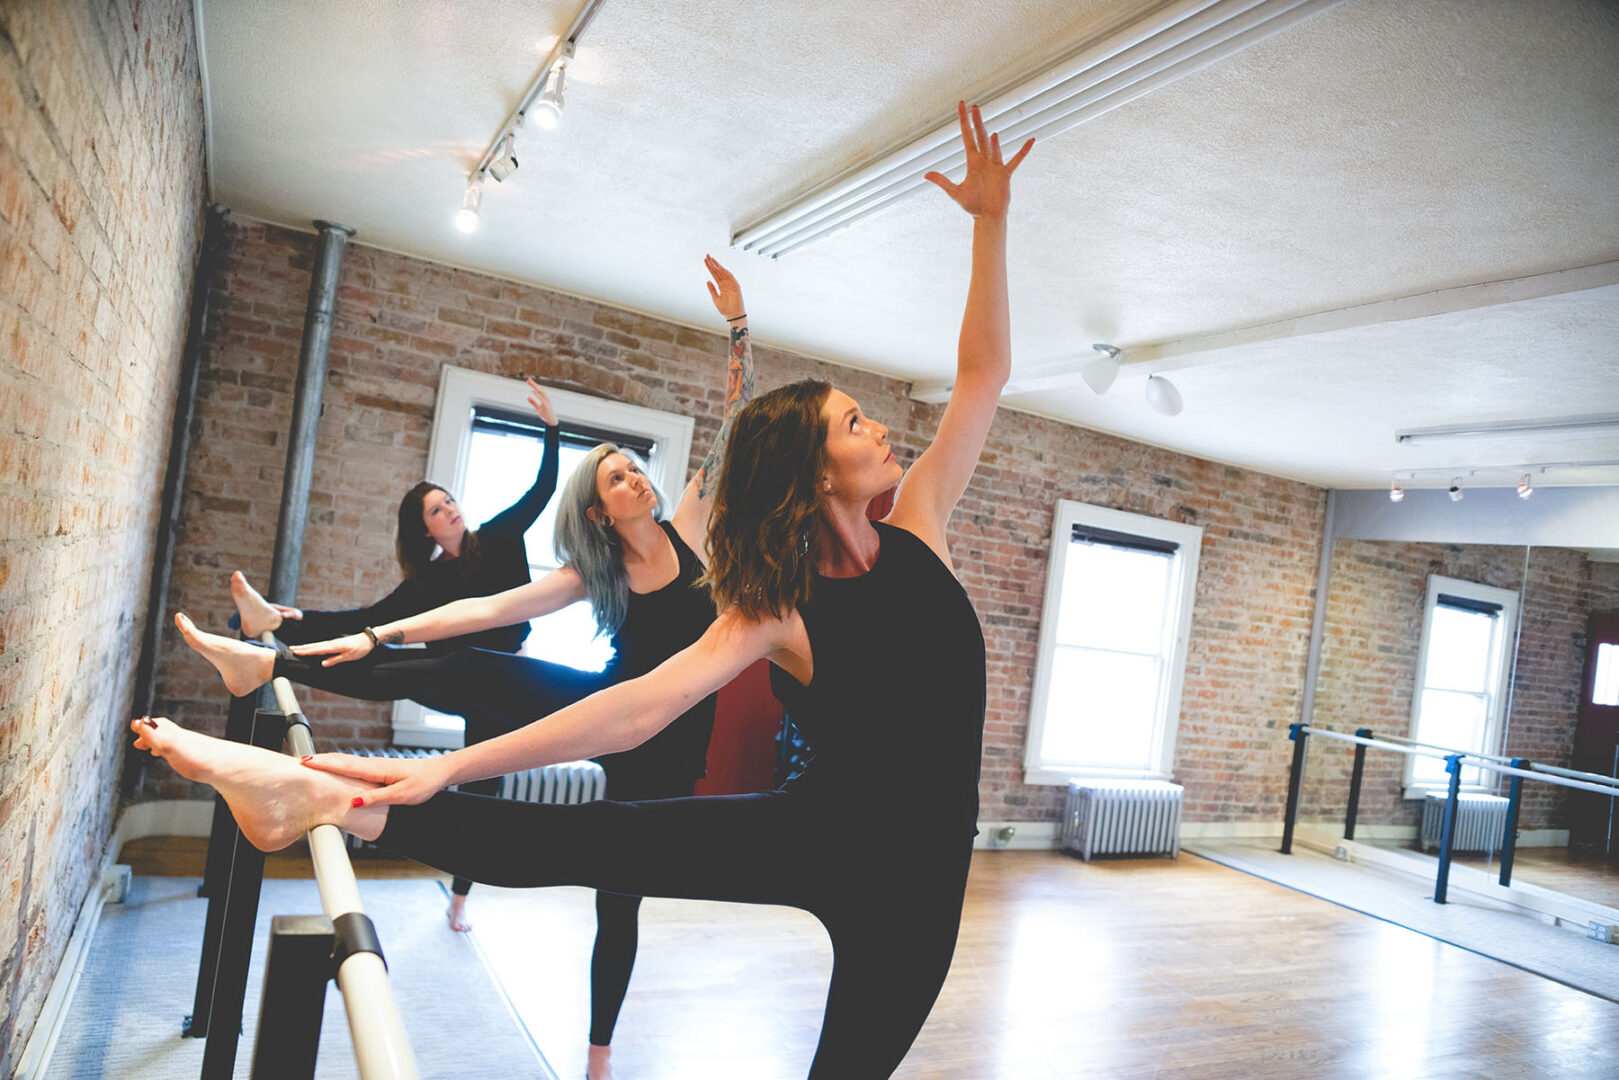 Three women doing a barre workout with arms stretched upward.